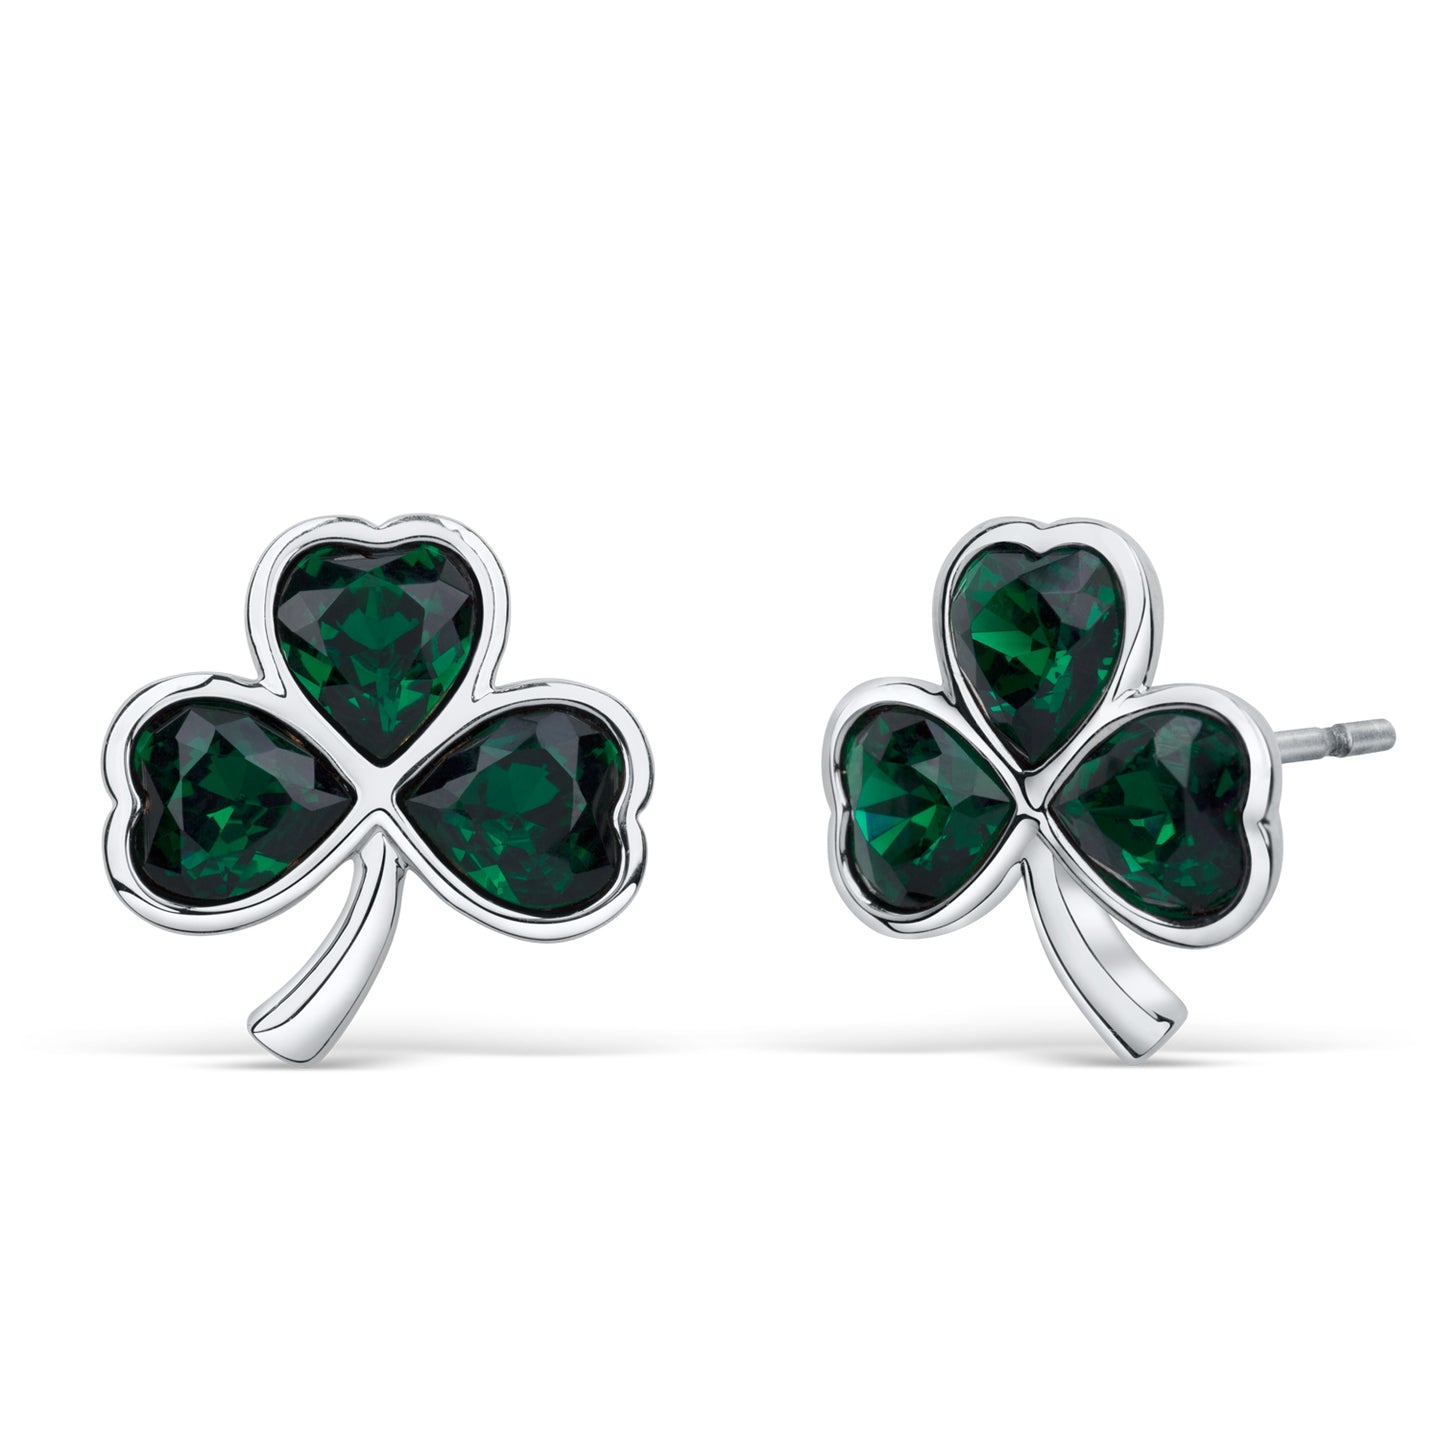 Shamrock Earrings with Emerald Green Crystals